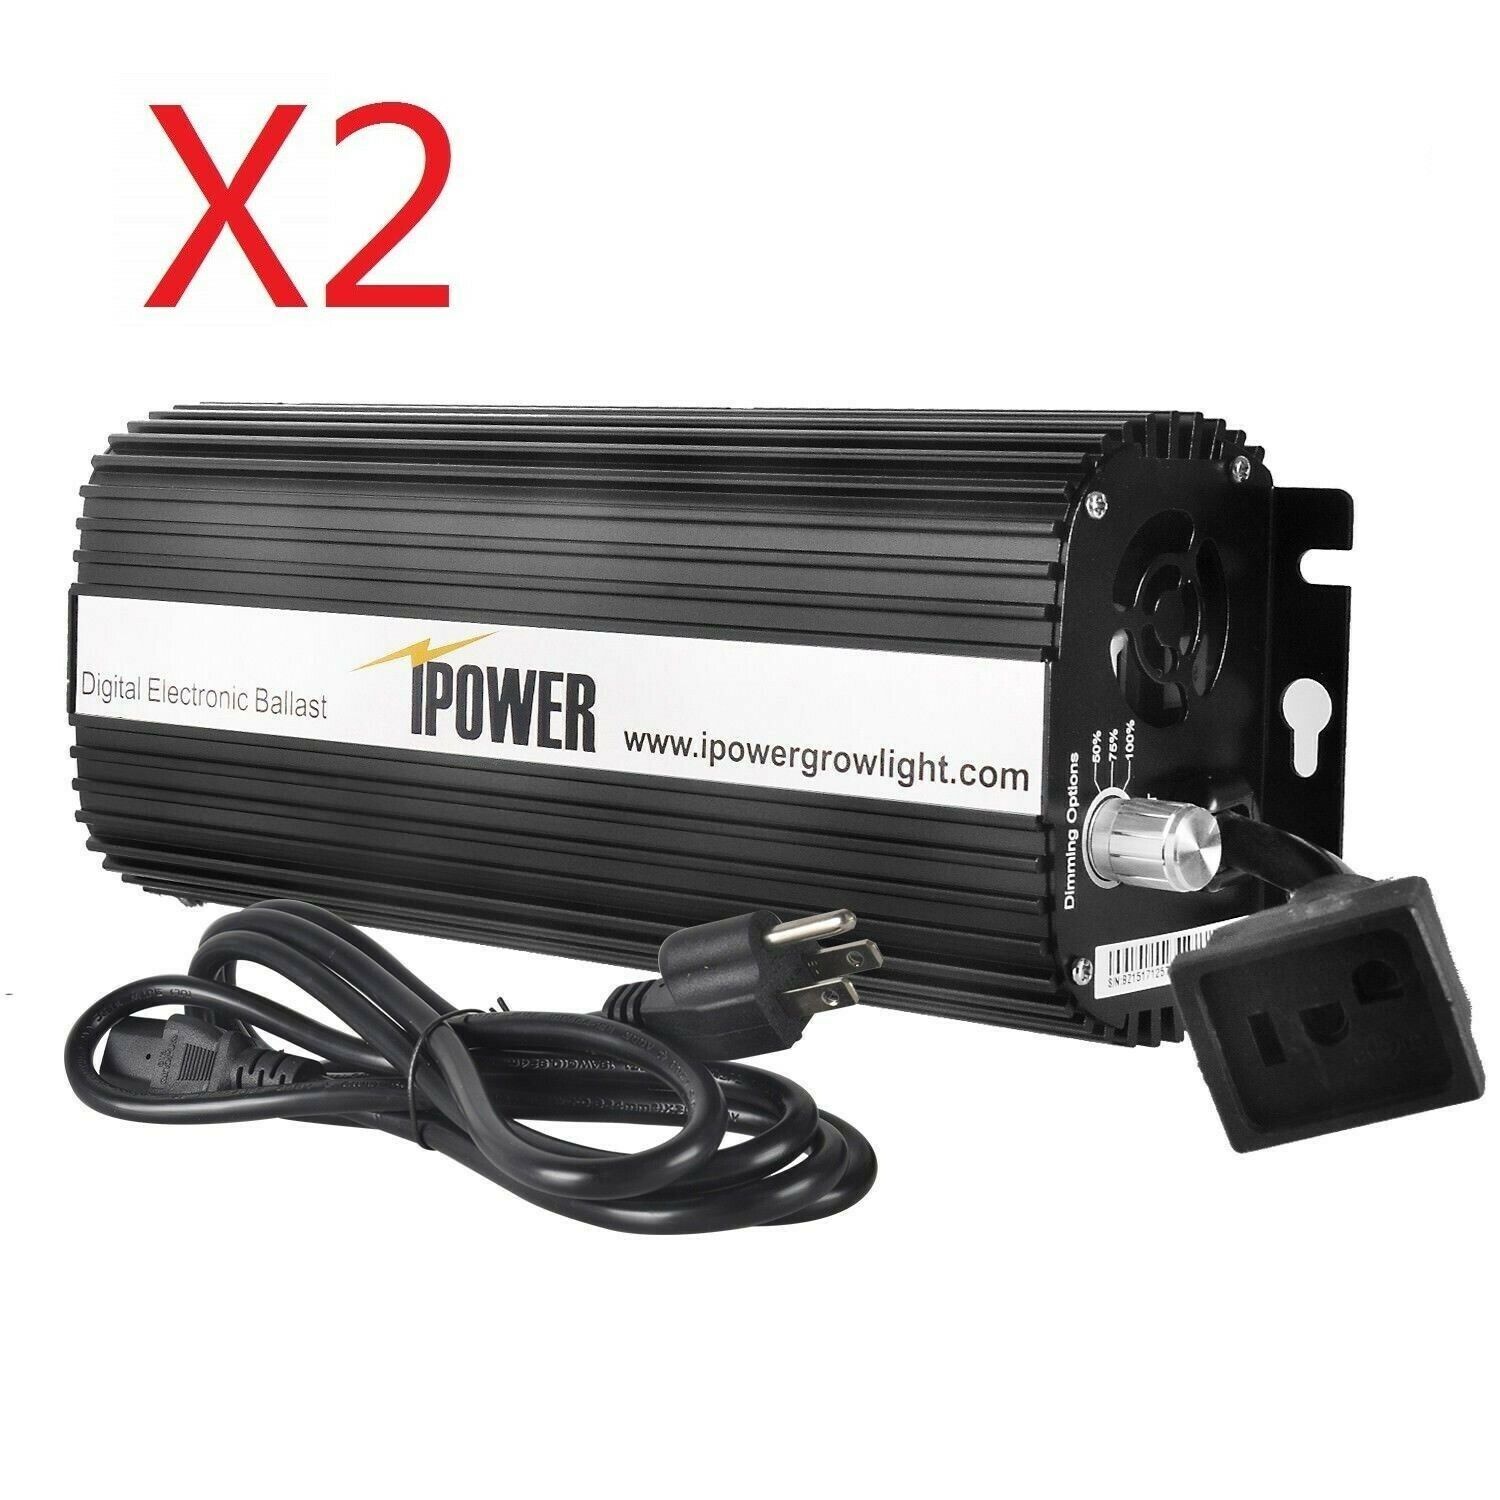 iPower 1000W Digital Dimmable Electronic Ballast for HPS MH Grow Light 2-Pack